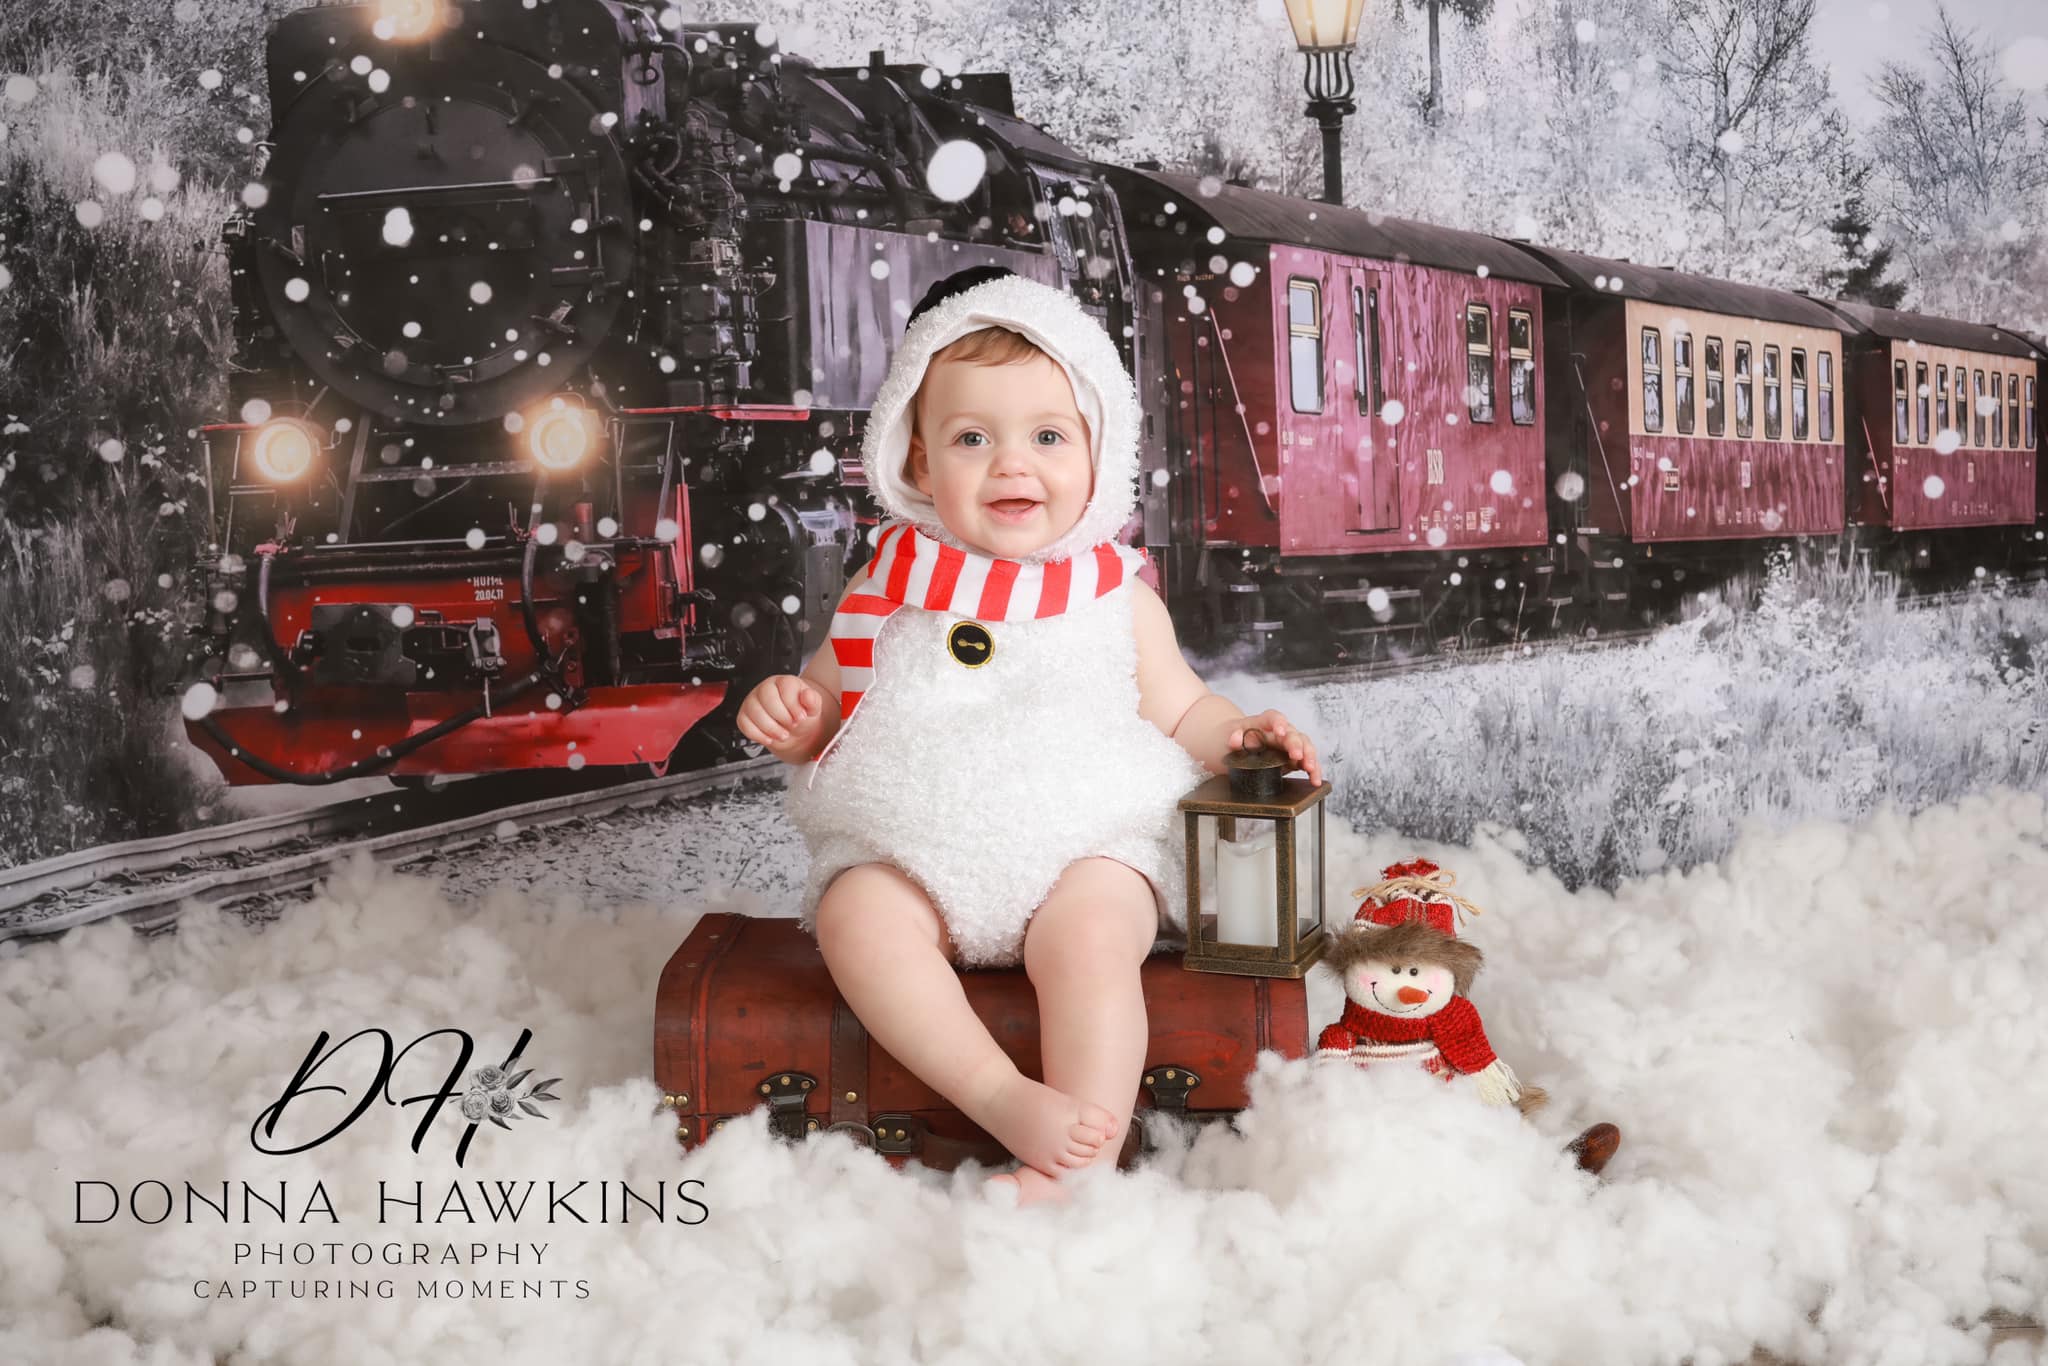 Kate Winter Snowy Train Backdrop Designed by Chain Photography